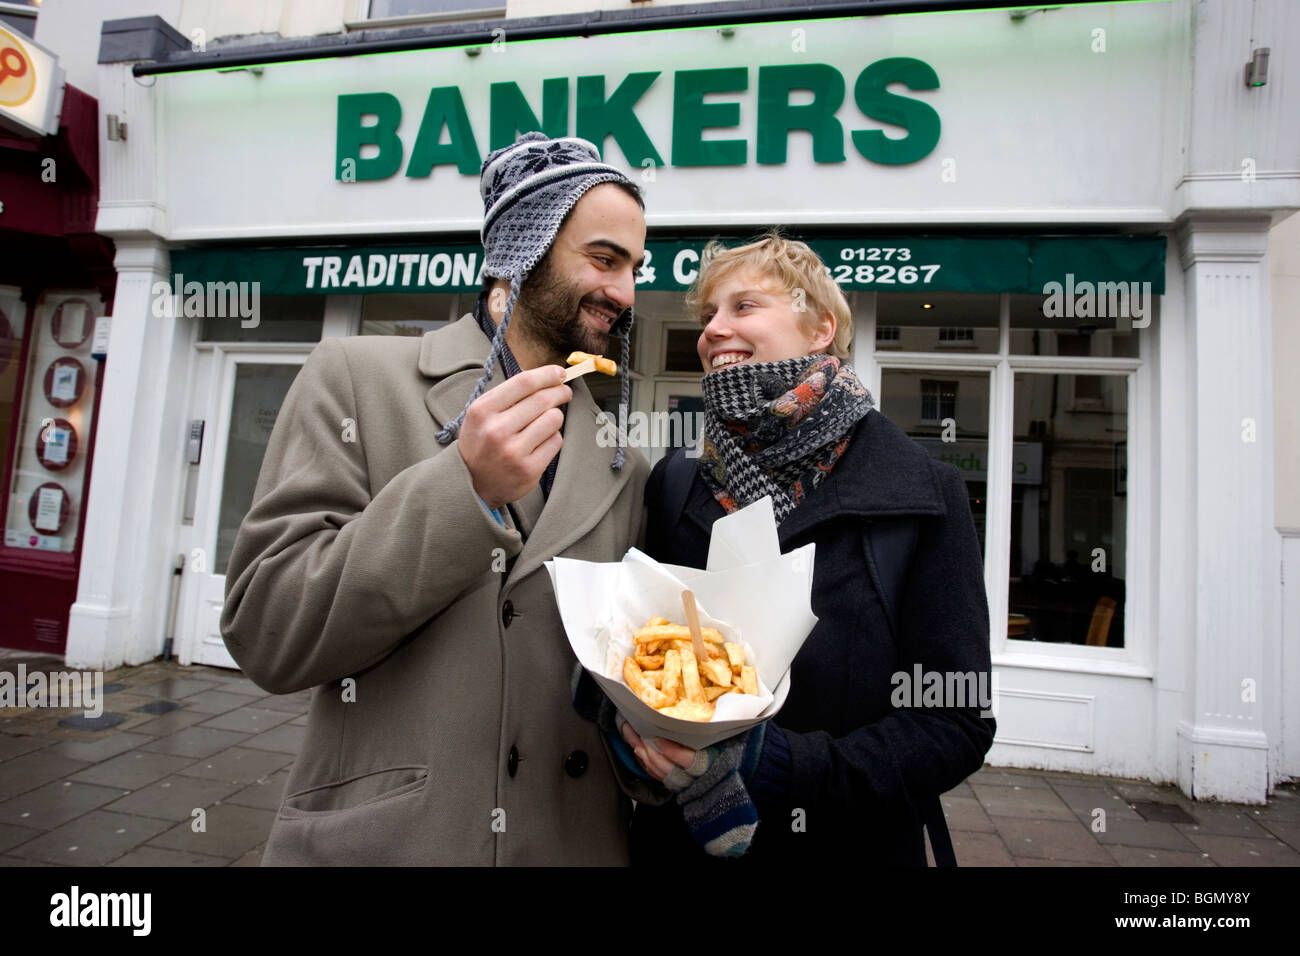 A young couple enjoy a small portion of chips outside Bankers Traditional Fish and Chip restaurant and take-away, Brighton, UK. Stock Photo